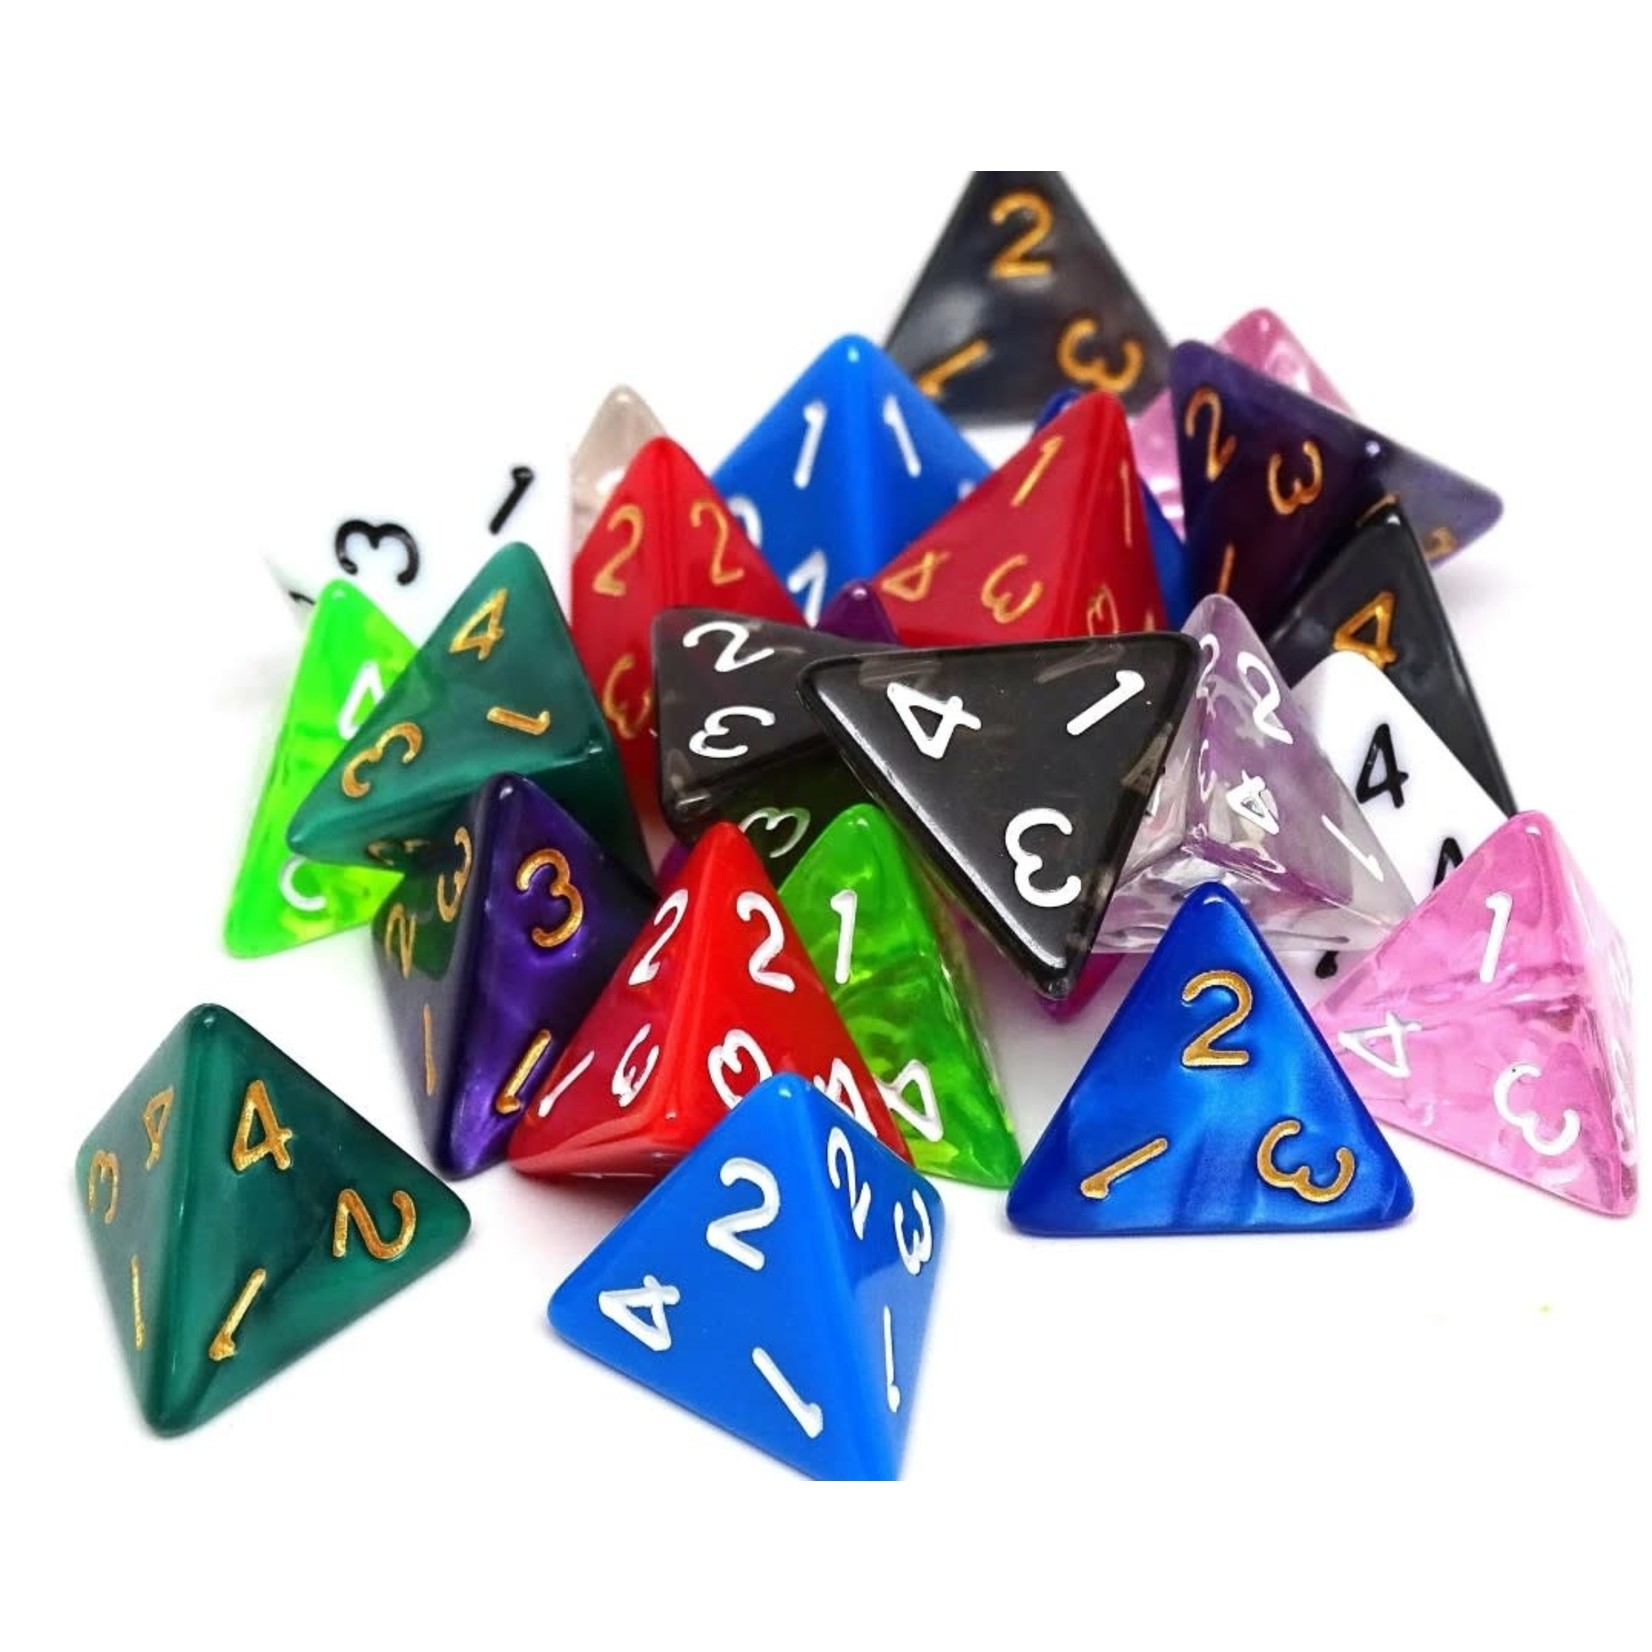 Easy Roller Dice 25 Count Multi Colored Assortment of D4 Polyhedral Dice